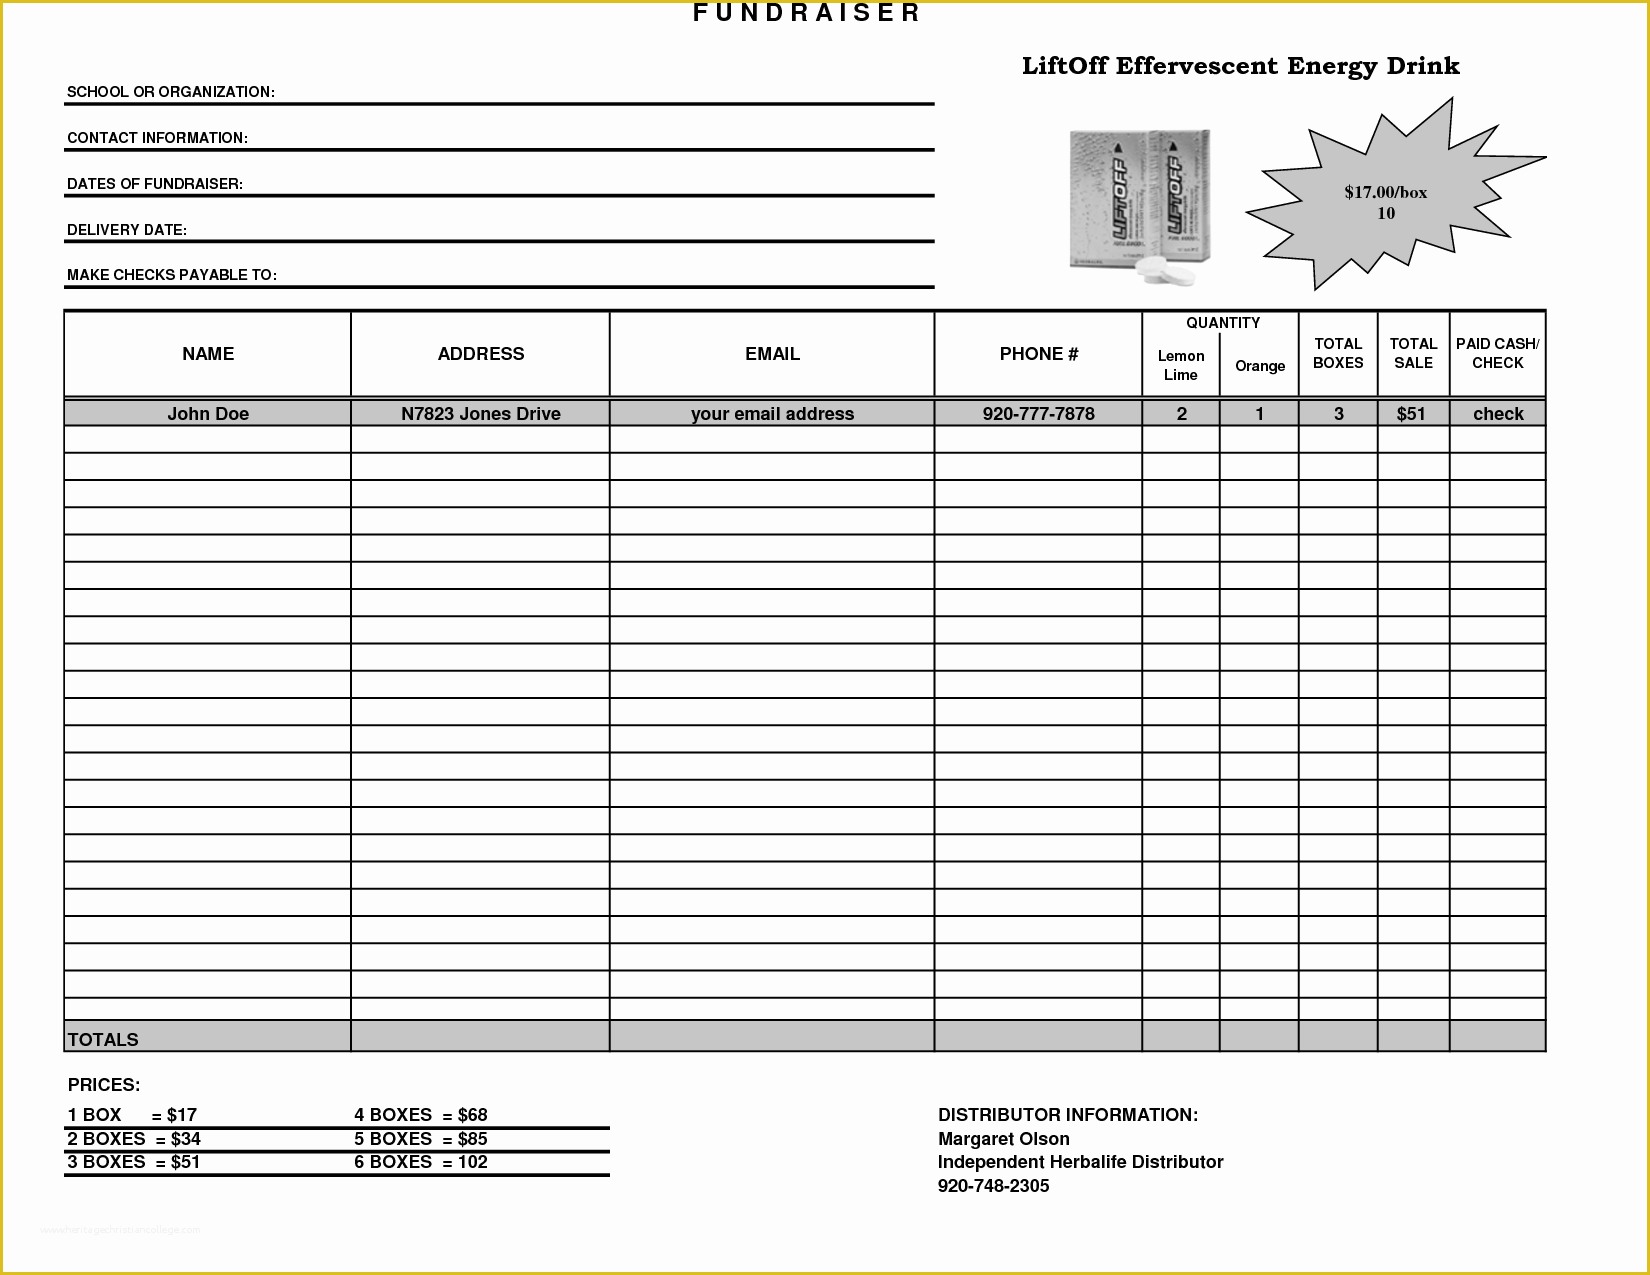 Fundraiser Template Free Of Fundraiser Template Excel Fundraiser order form Template